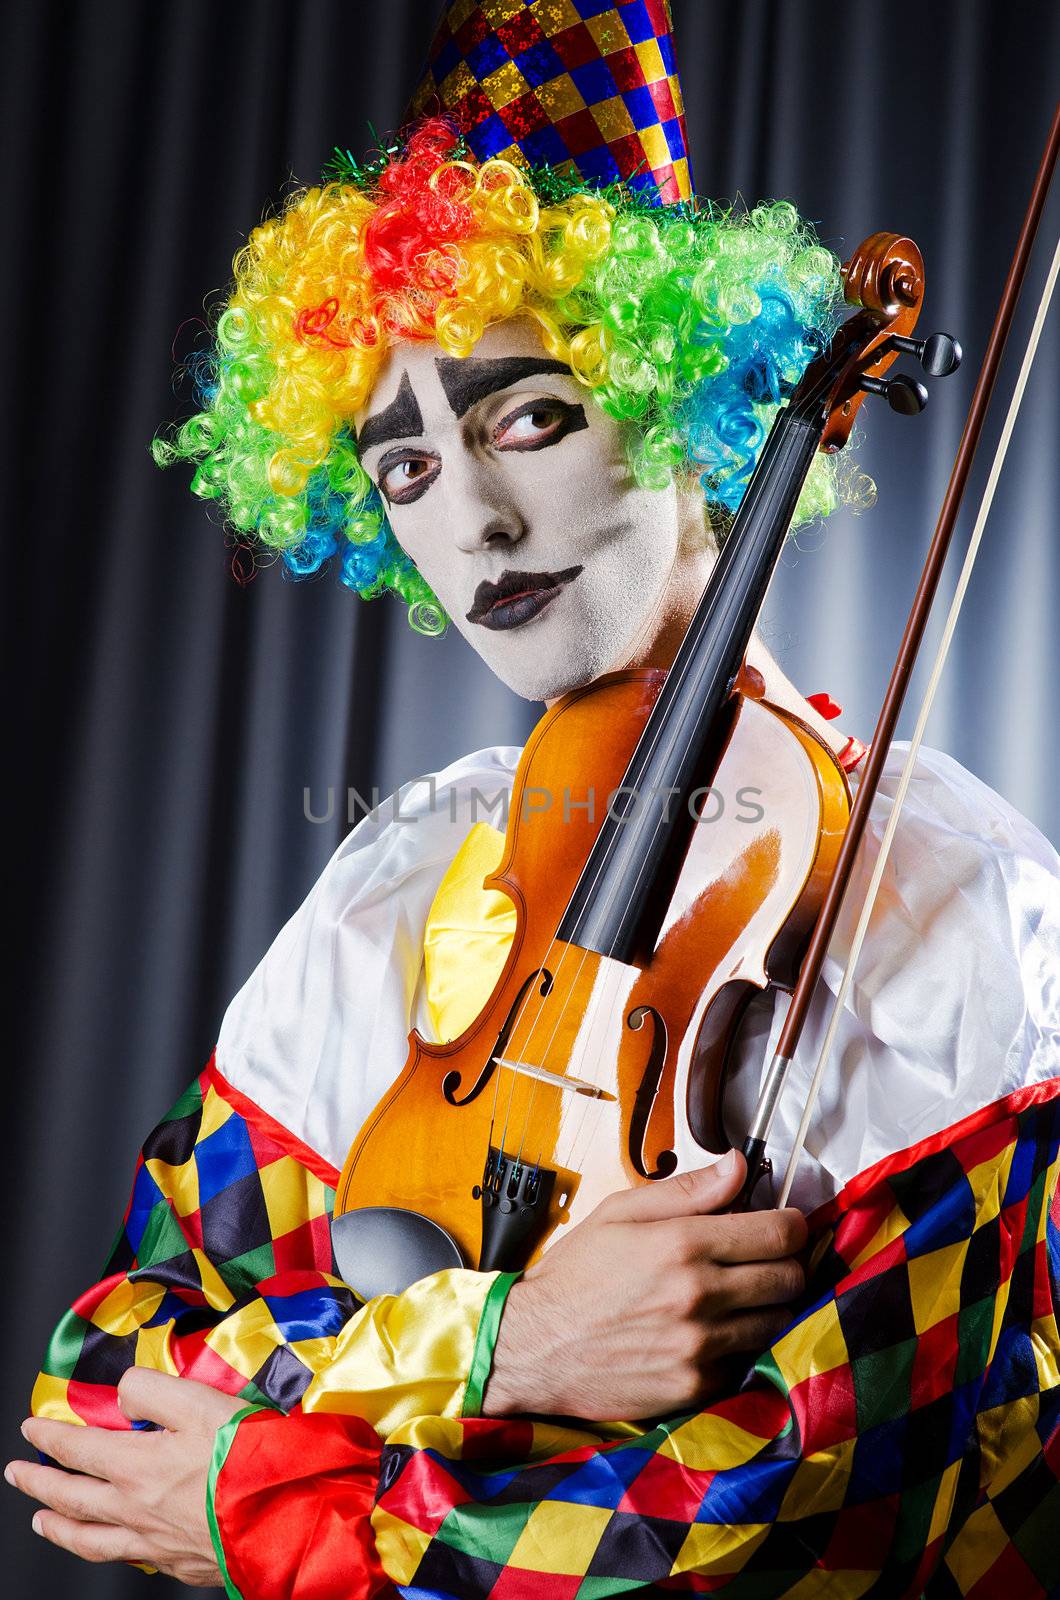 Clown playing on the violin by Elnur